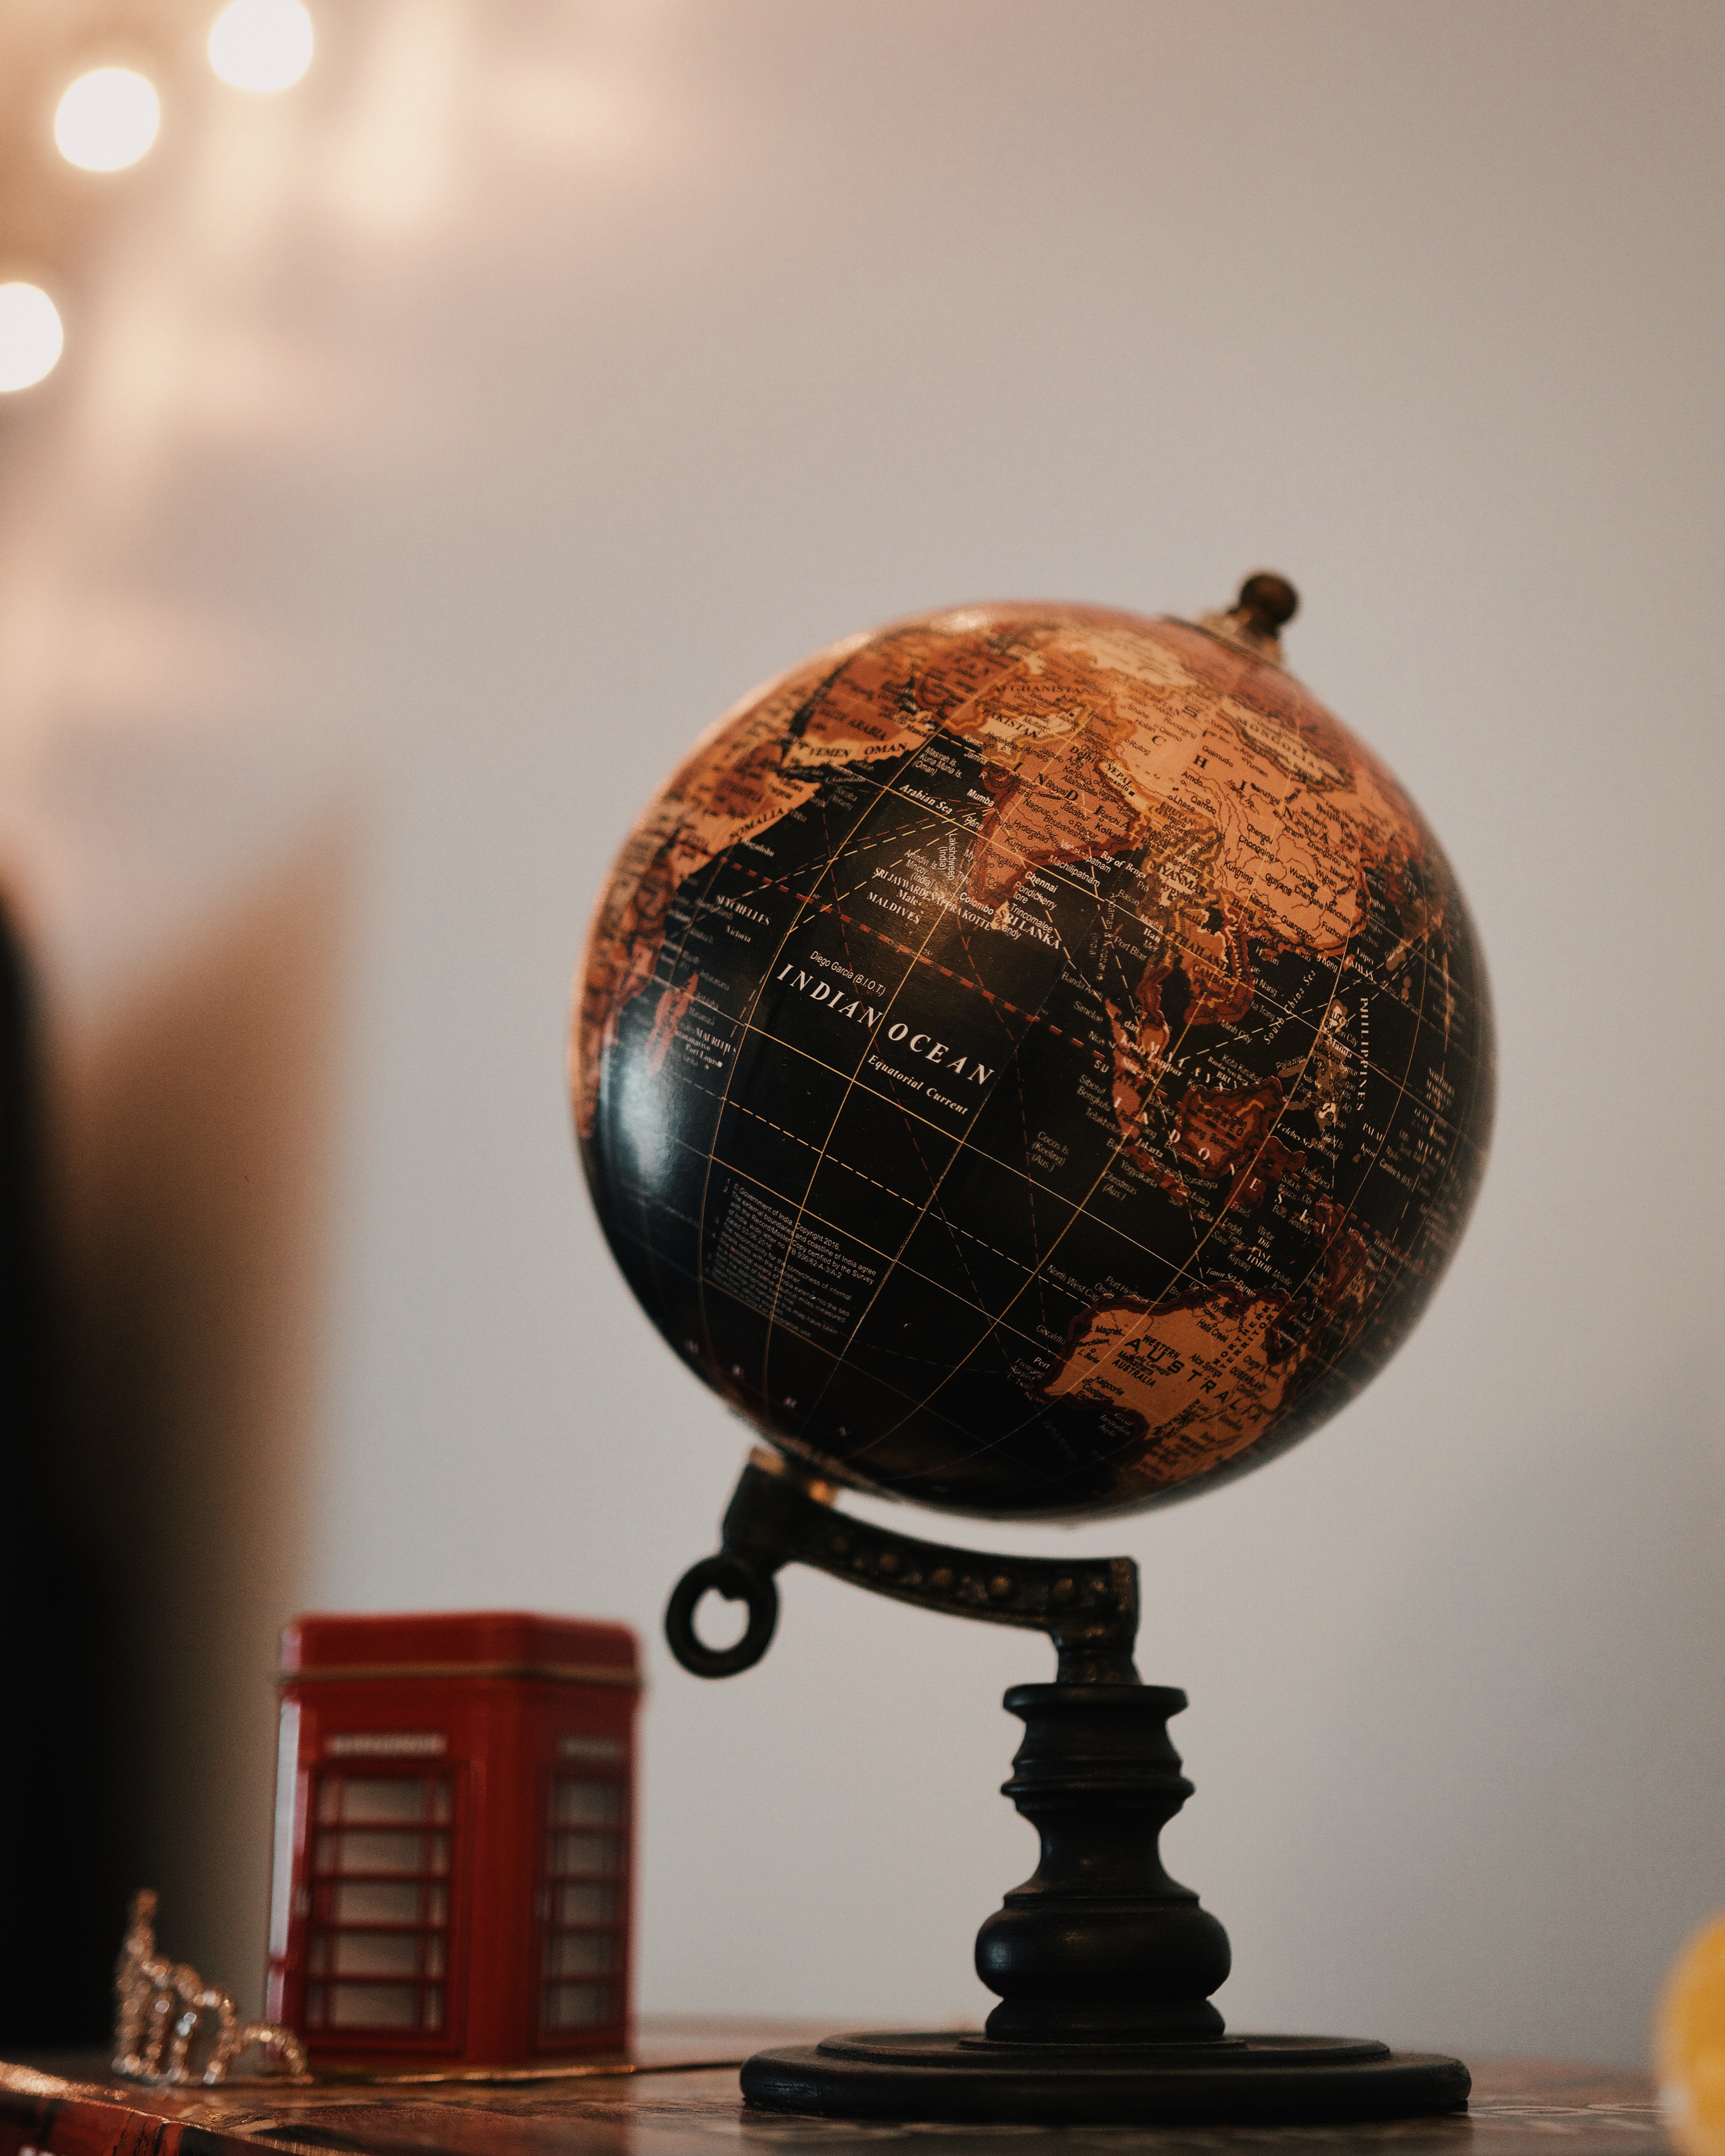 miscellanea, geography, miscellaneous, land, earth, ball, map, sphere, globe phone wallpaper